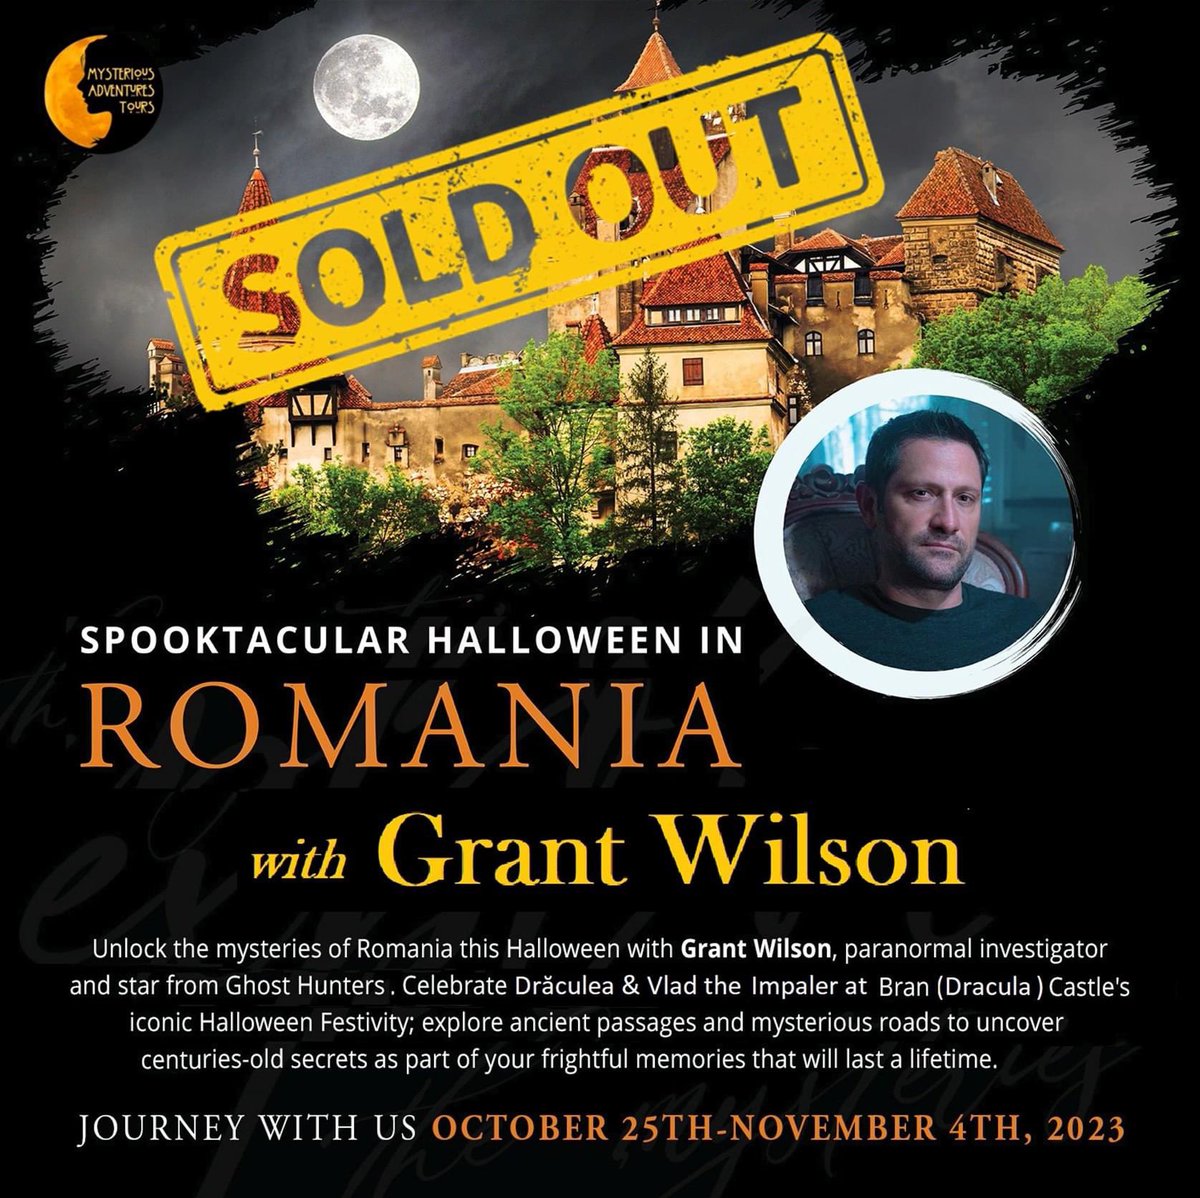 We are officially SOLD OUT for Romania! To all those who will join us, THANK YOU! This is going to be incredible! Feel free to join a wait list if you truly want to join! mysteriousadventurestours.com